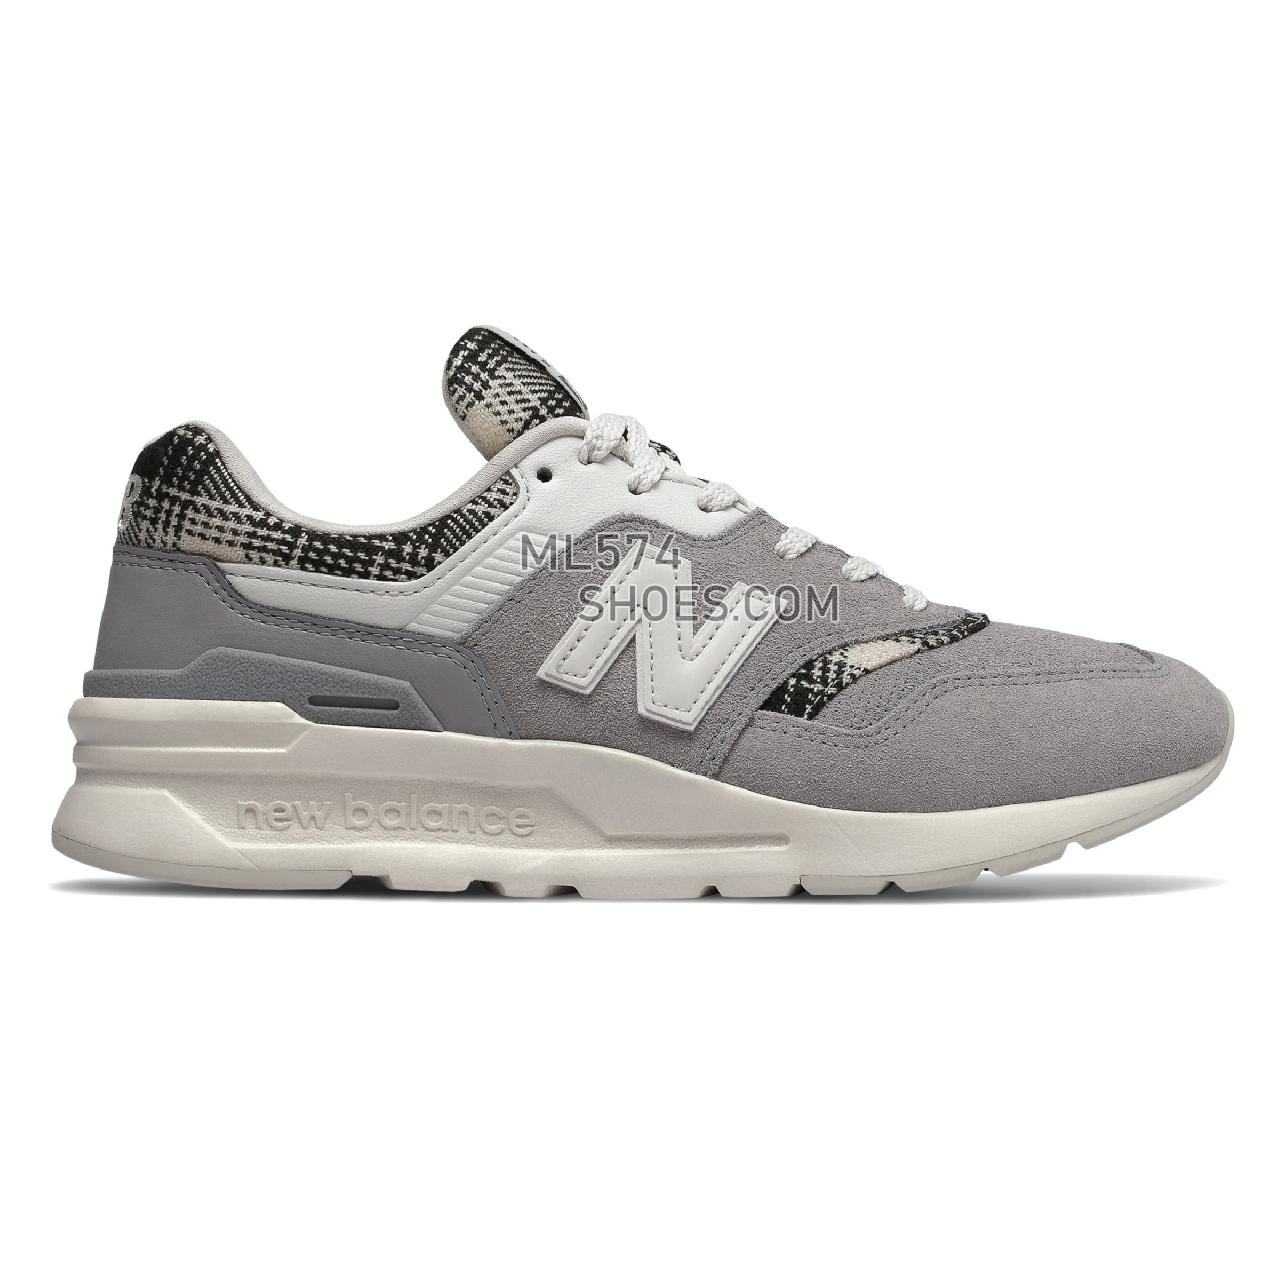 New Balance 997H - Women's Classic Sneakers - Marblehead with Black - CW997HXC